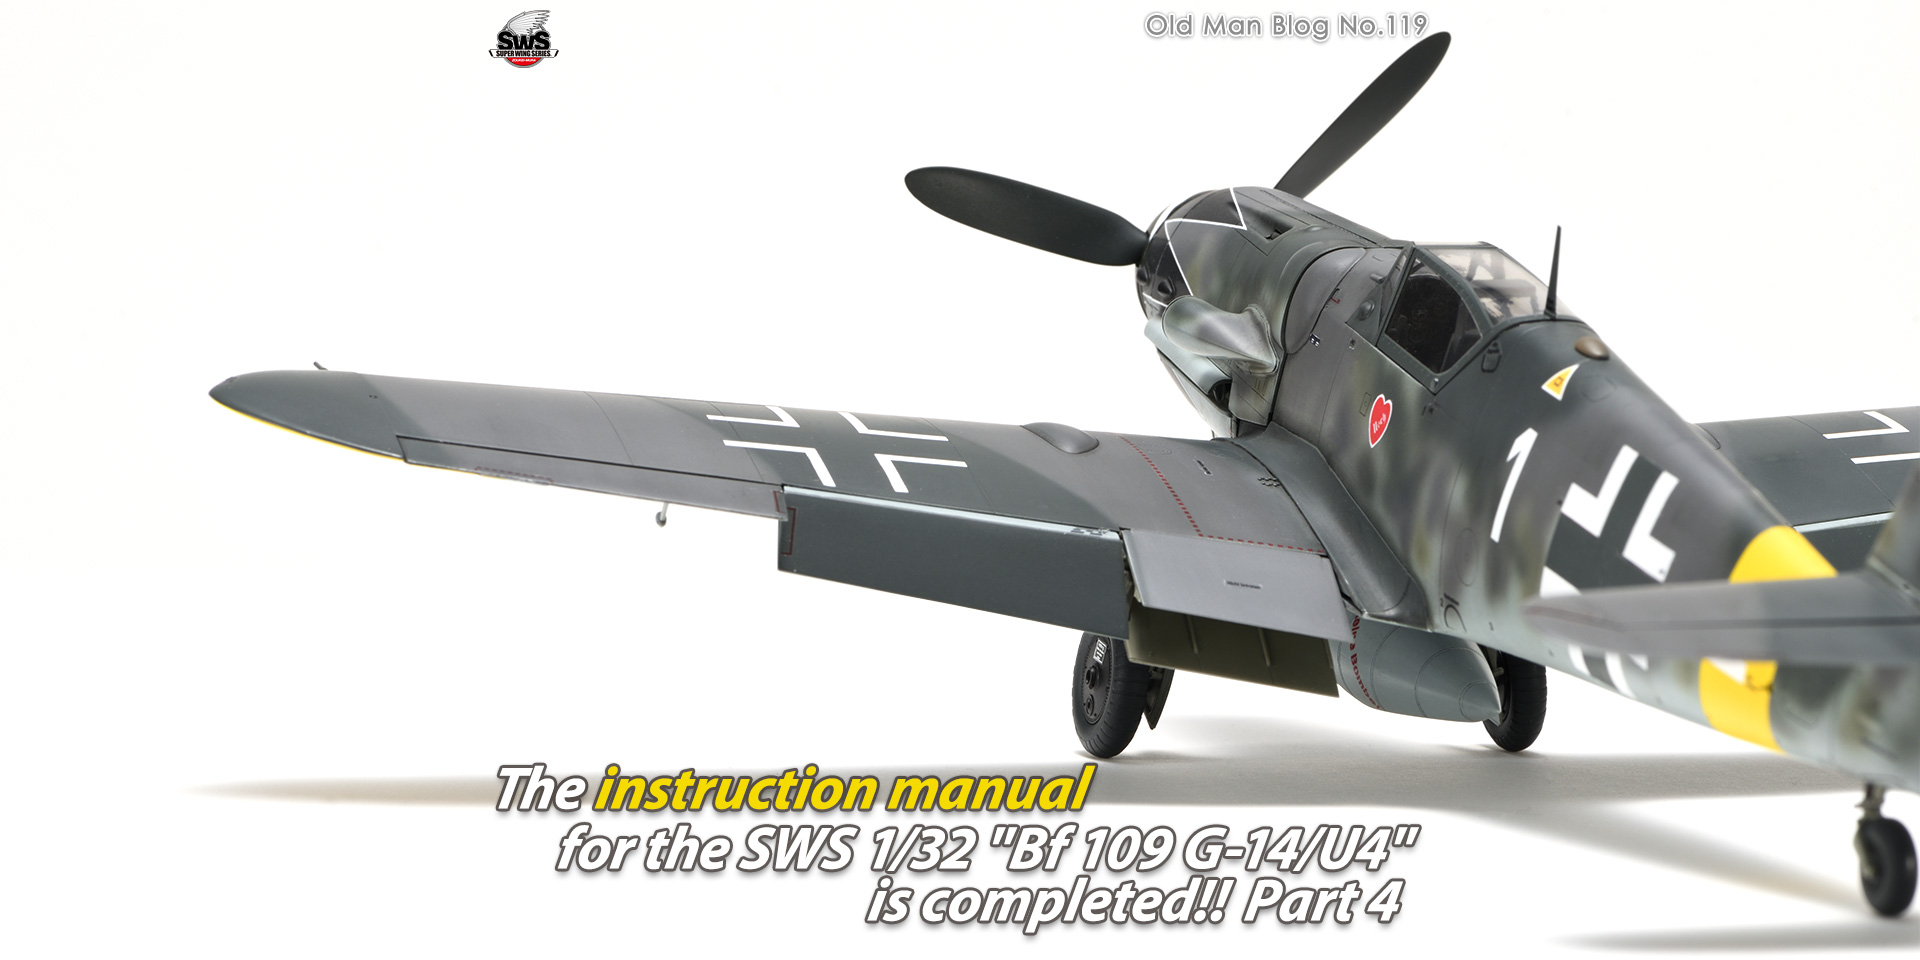 The instruction manual for the SWS 1/32 Bf 109 G-14/U14 is completed!! Part 4